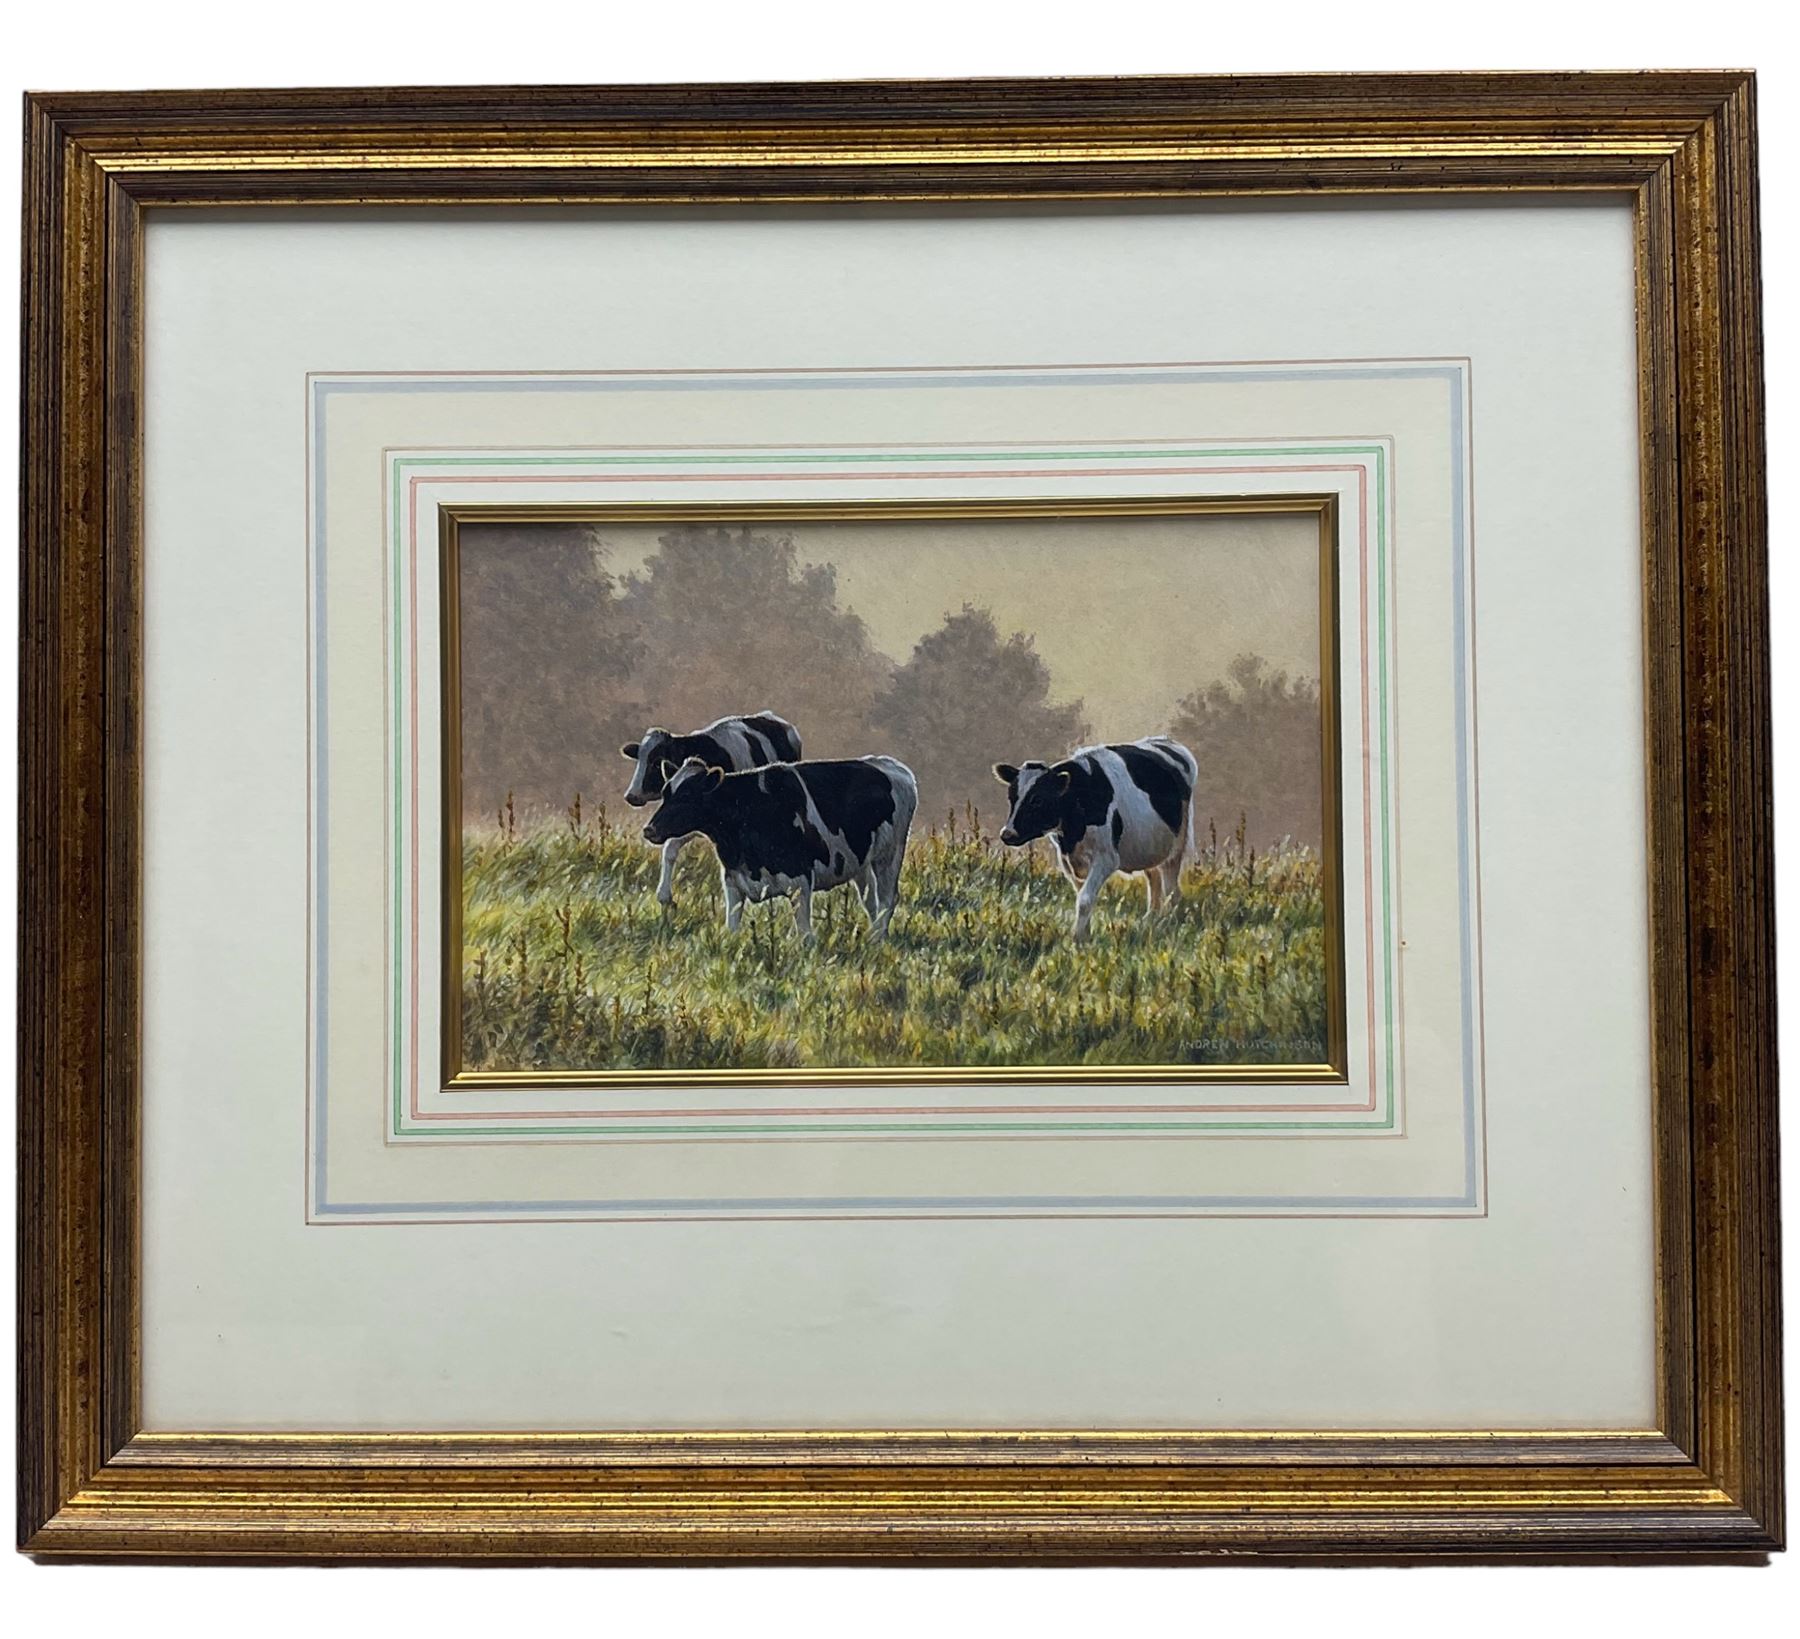 Andrew Hutchinson (British 1961-): Cattle in a Summer Field - Image 2 of 3